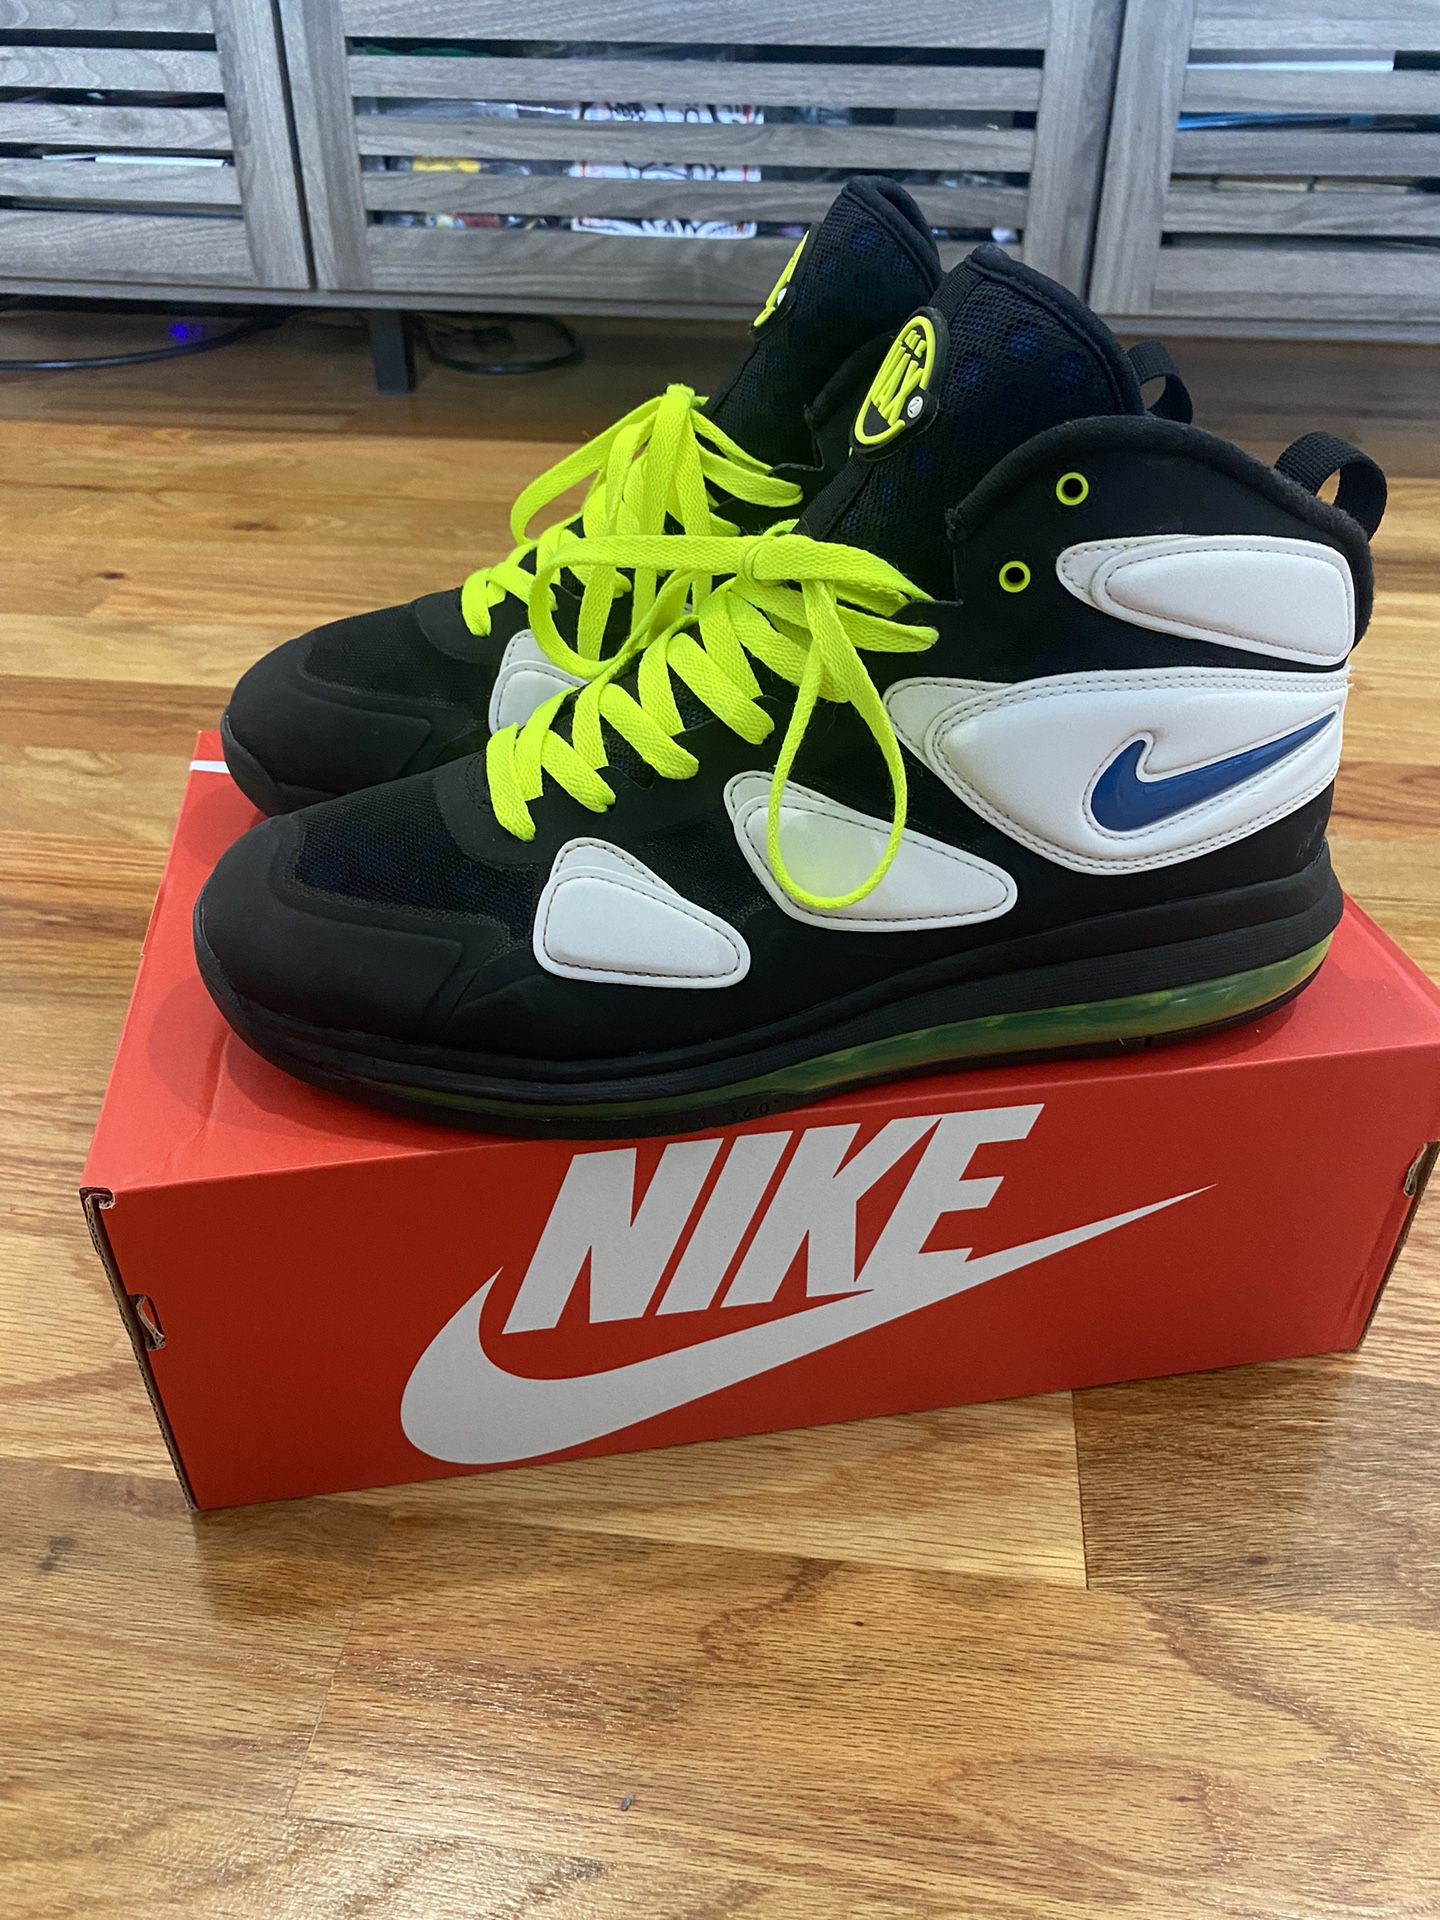 Vintage Nike Air Max 180 SQ for in Kearny, NJ - OfferUp